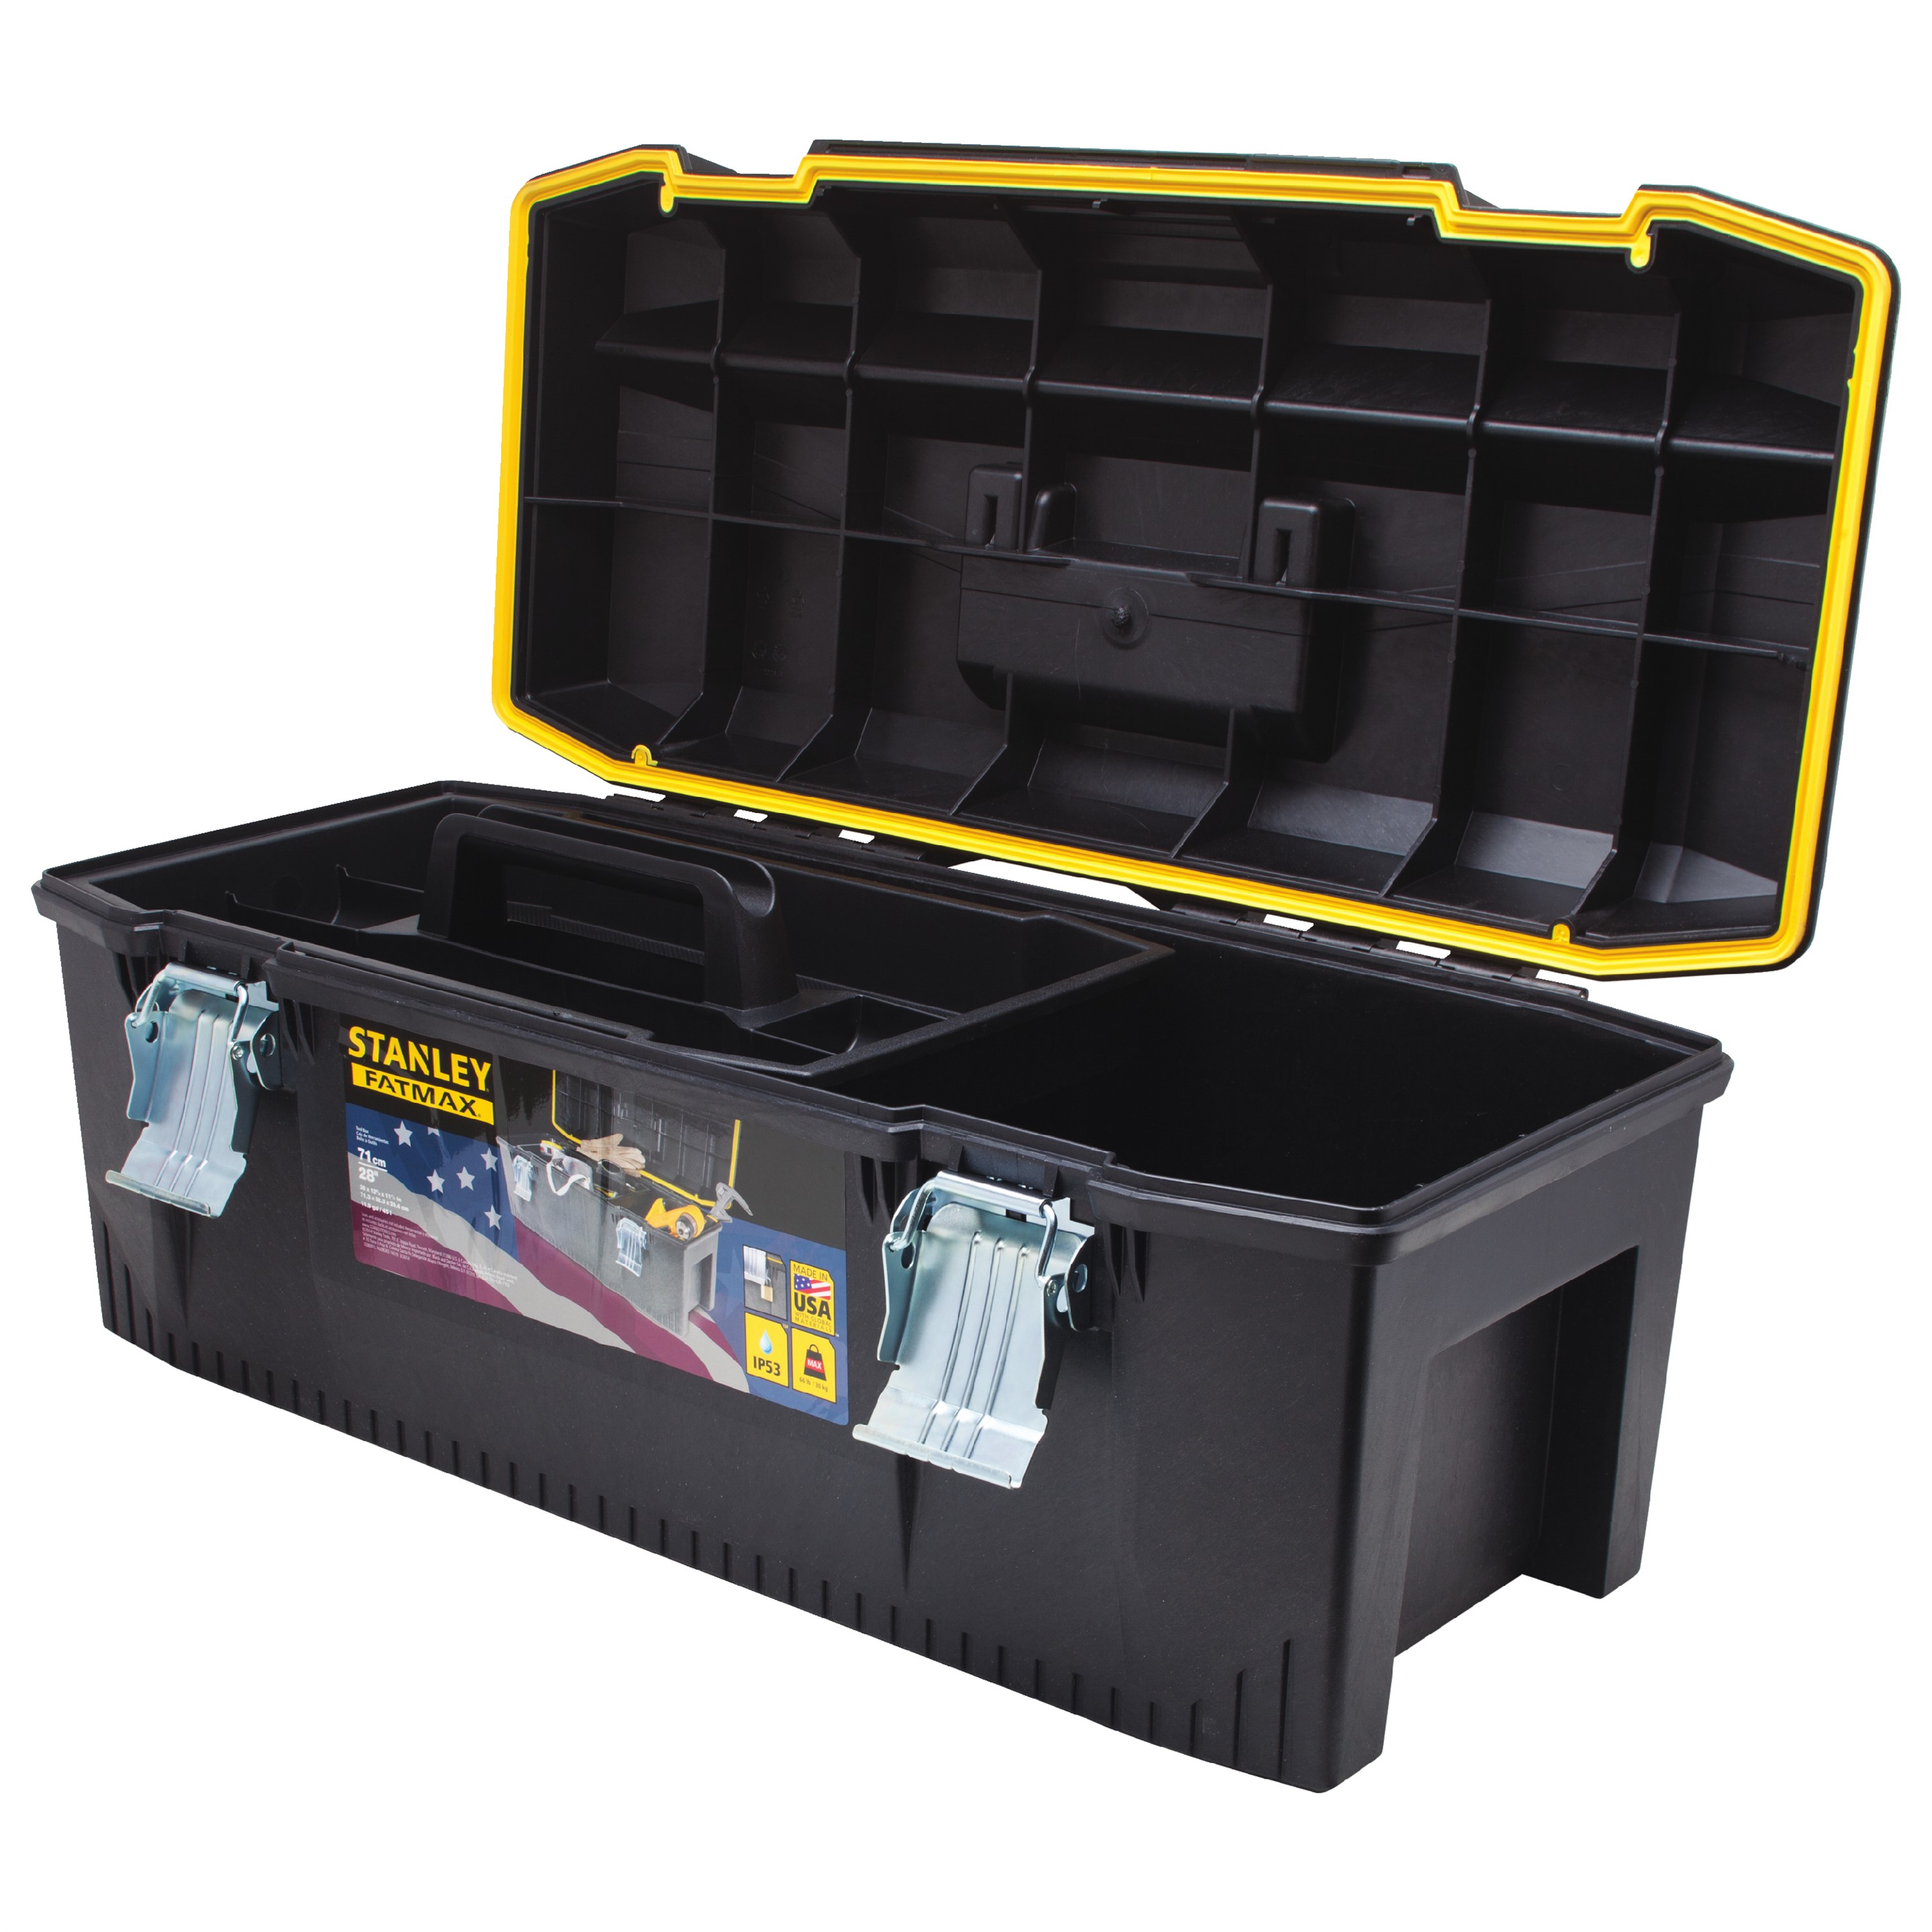 STANLEY FATMAX 028001L Structural Foam Tool Box, 28 In. - image 2 of 3